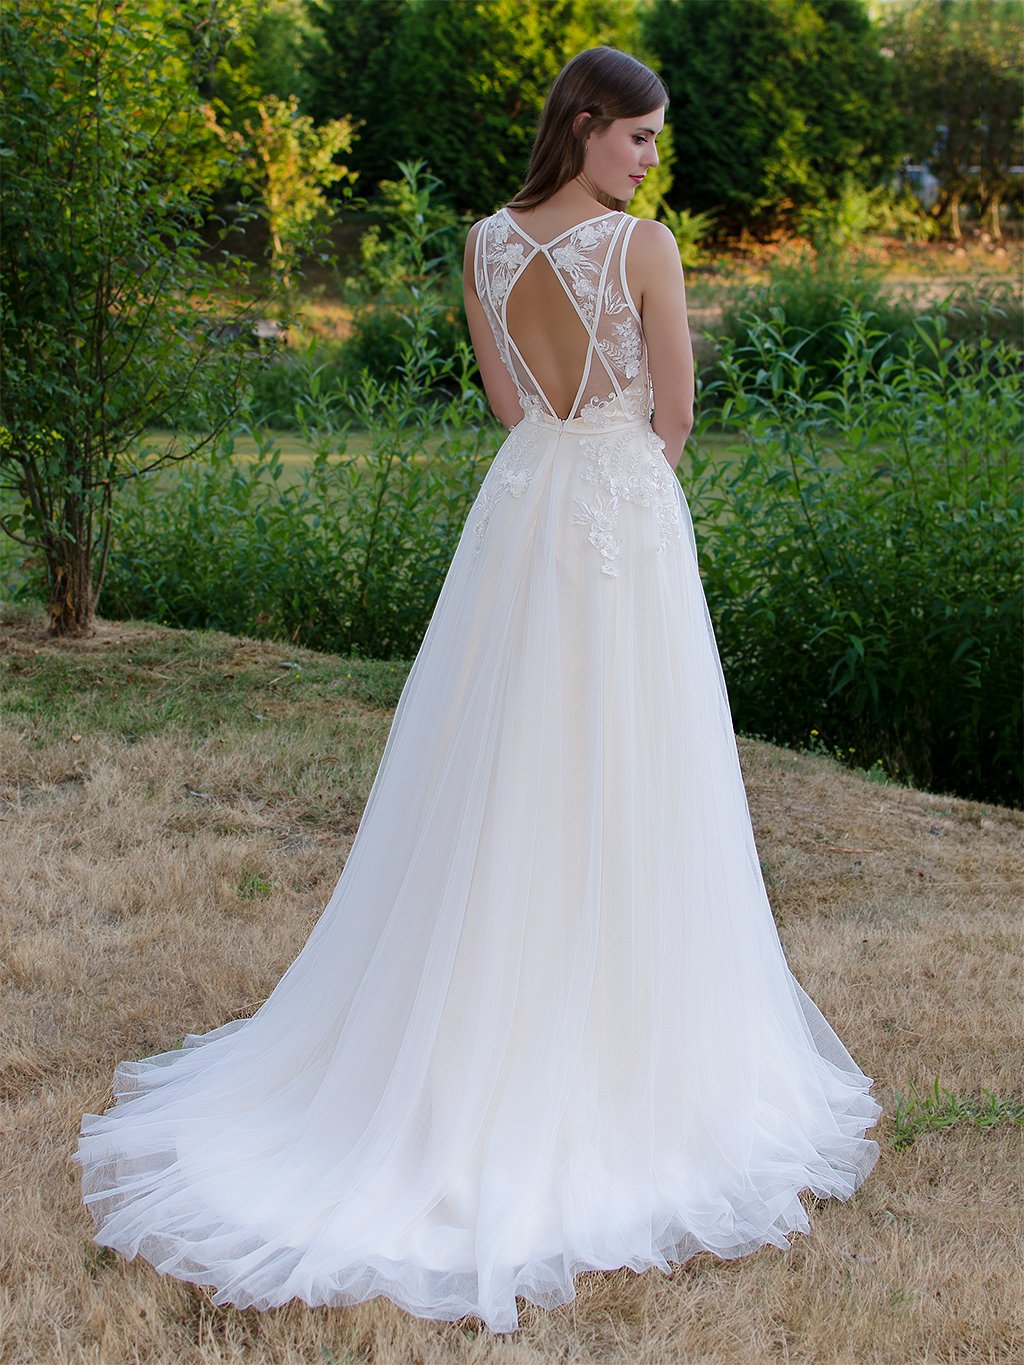 Sleeveless lace wedding dress with tulle skirts 4044